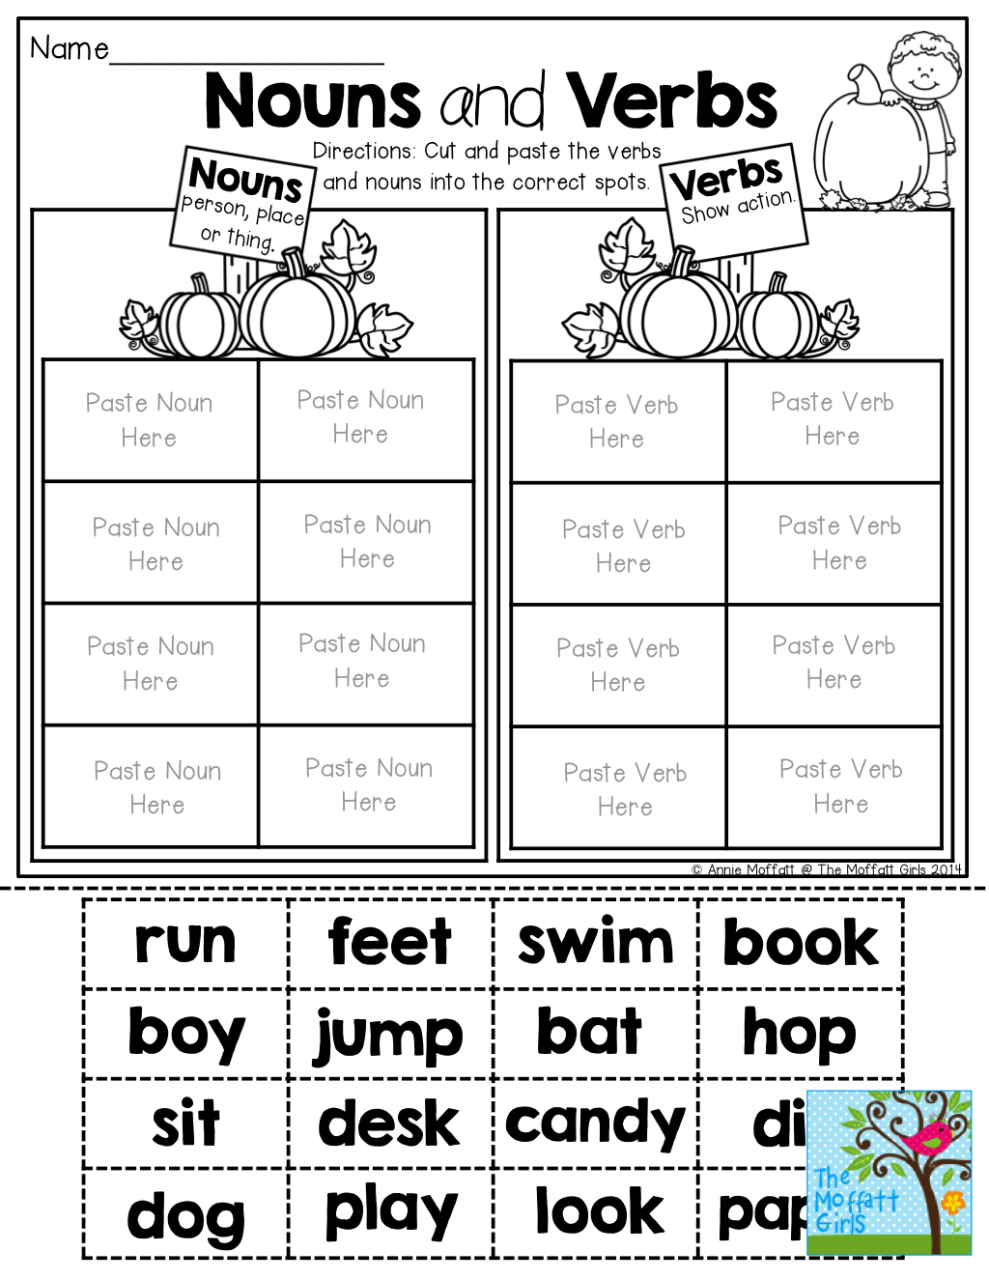 Free Printable 8 Times Tables Worksheets